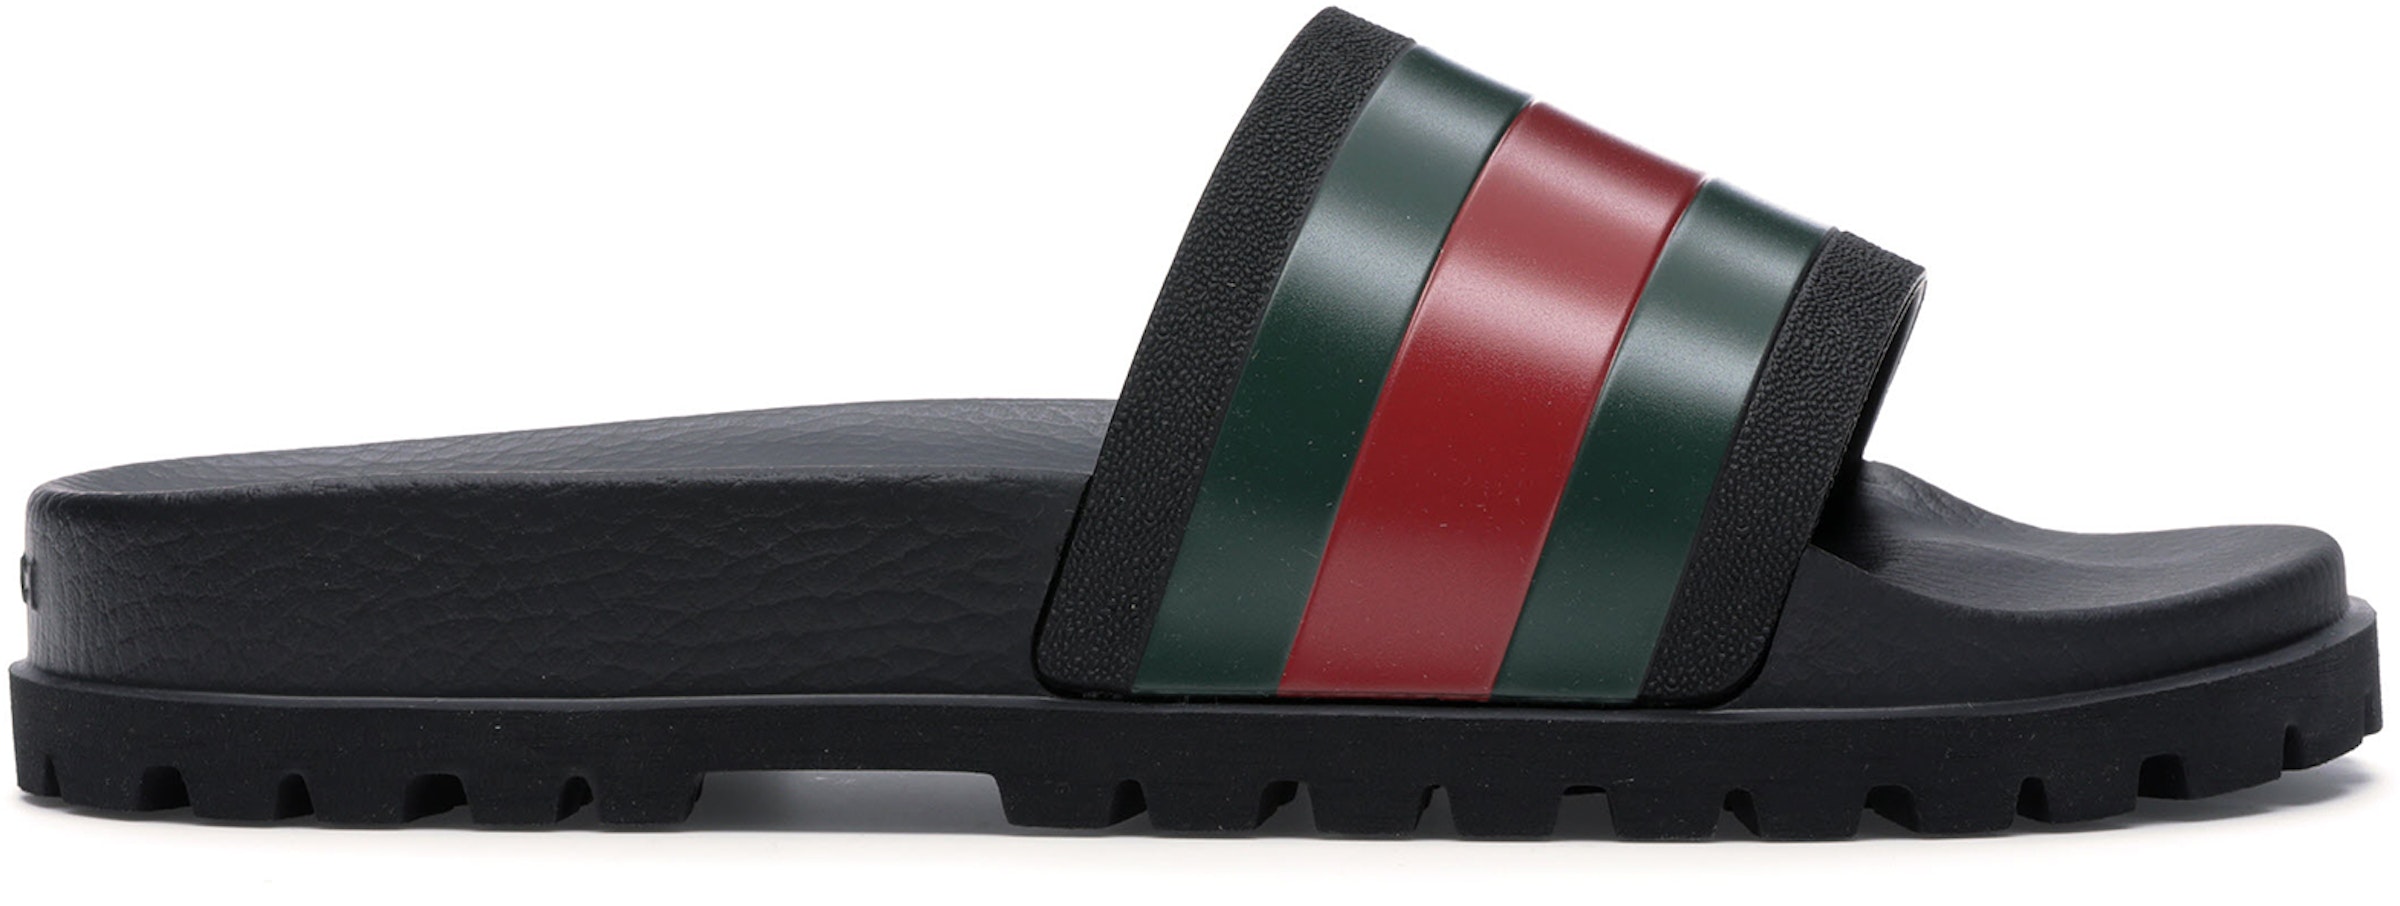 Buy Gucci Slides Sandals Shoes & New Sneakers StockX